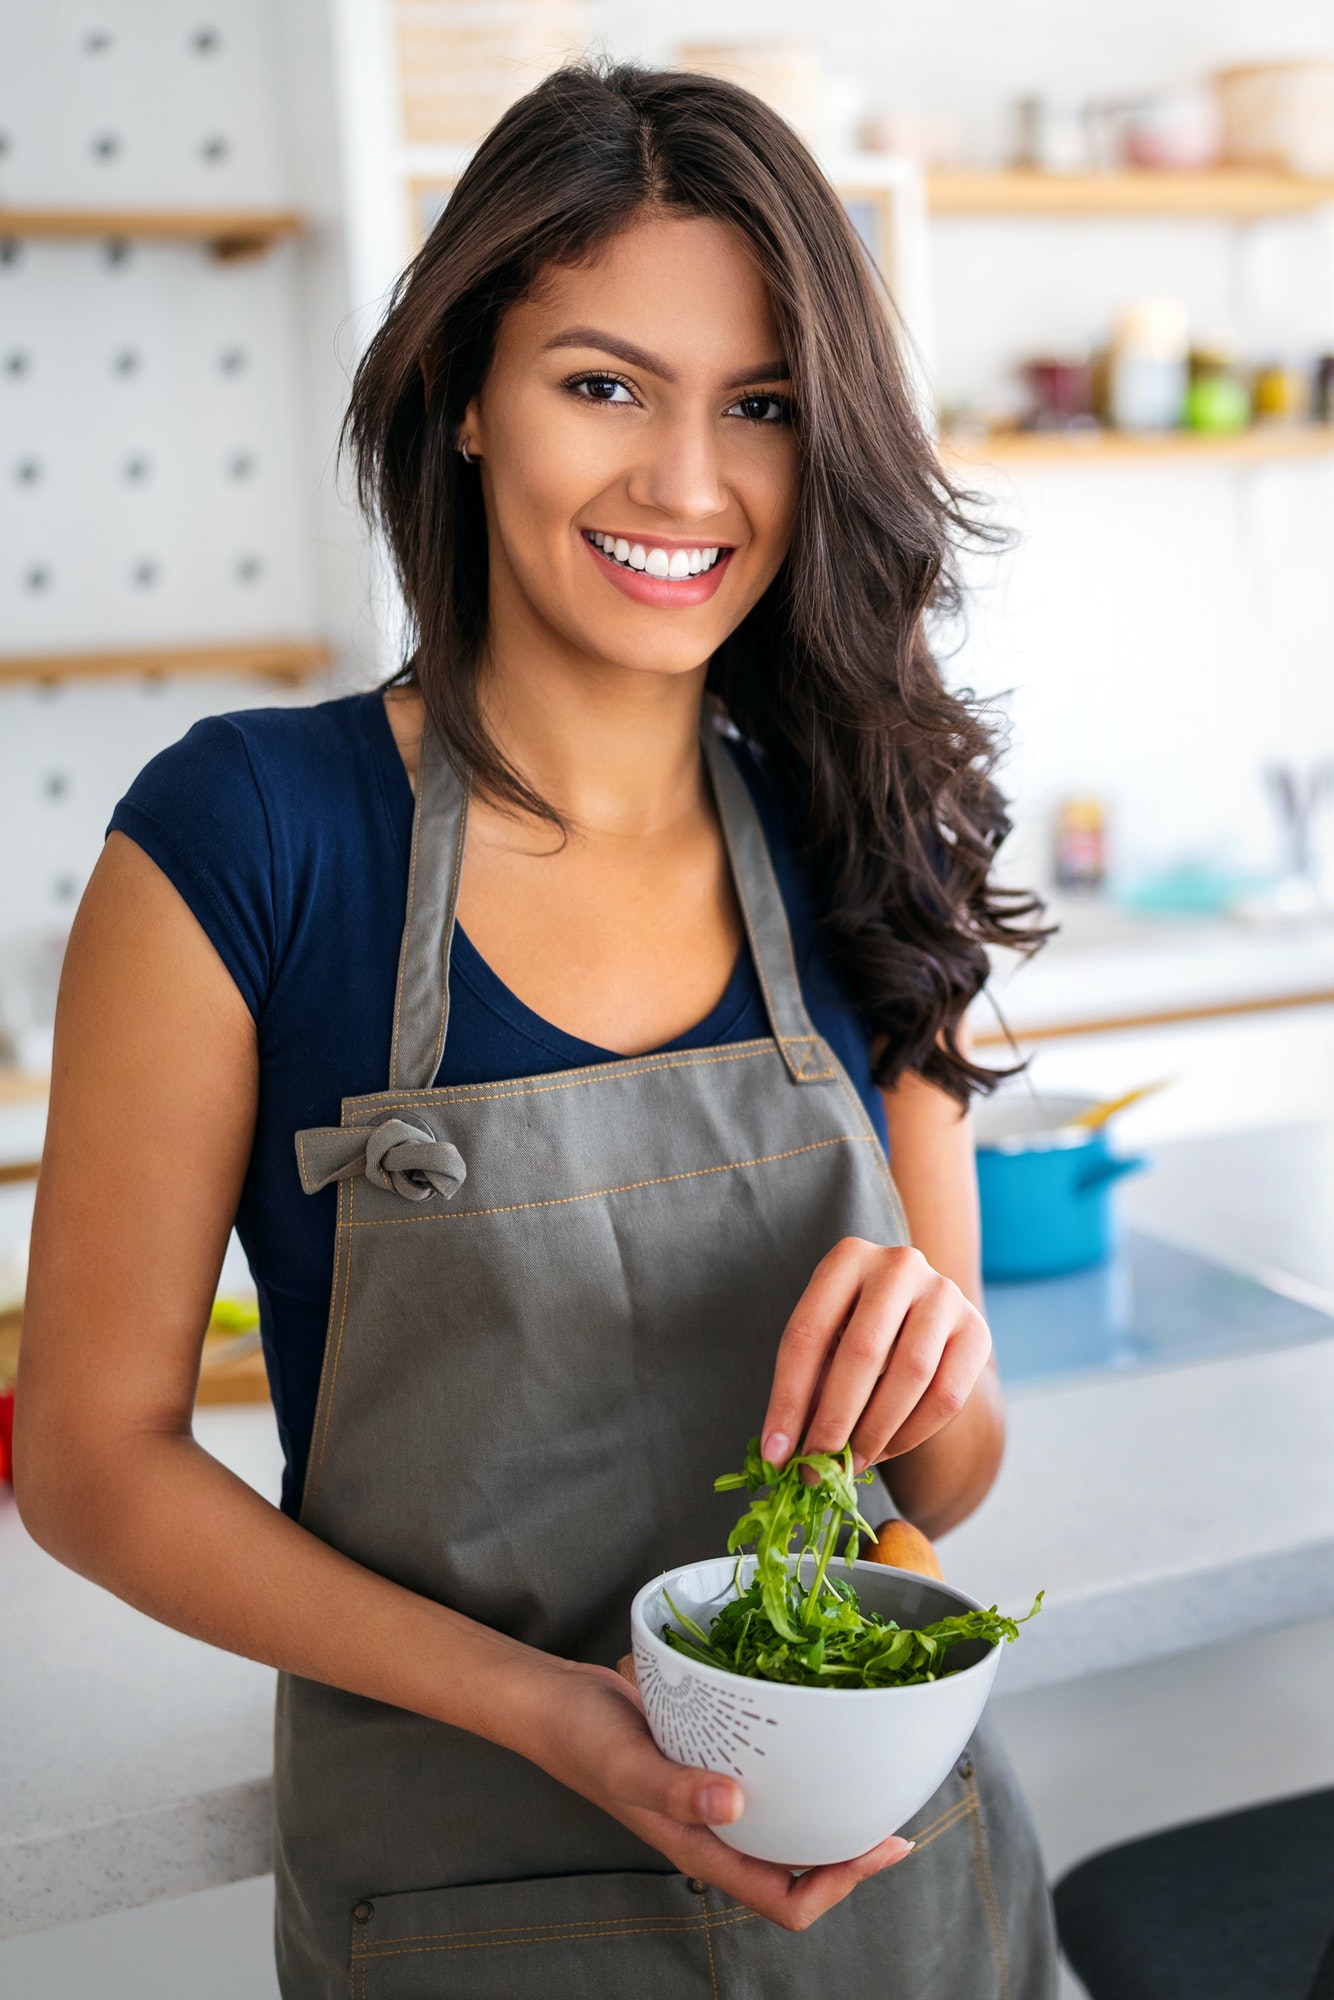 Beautiful healthy woman eating salad. Dieting, healthy lifestyle concept